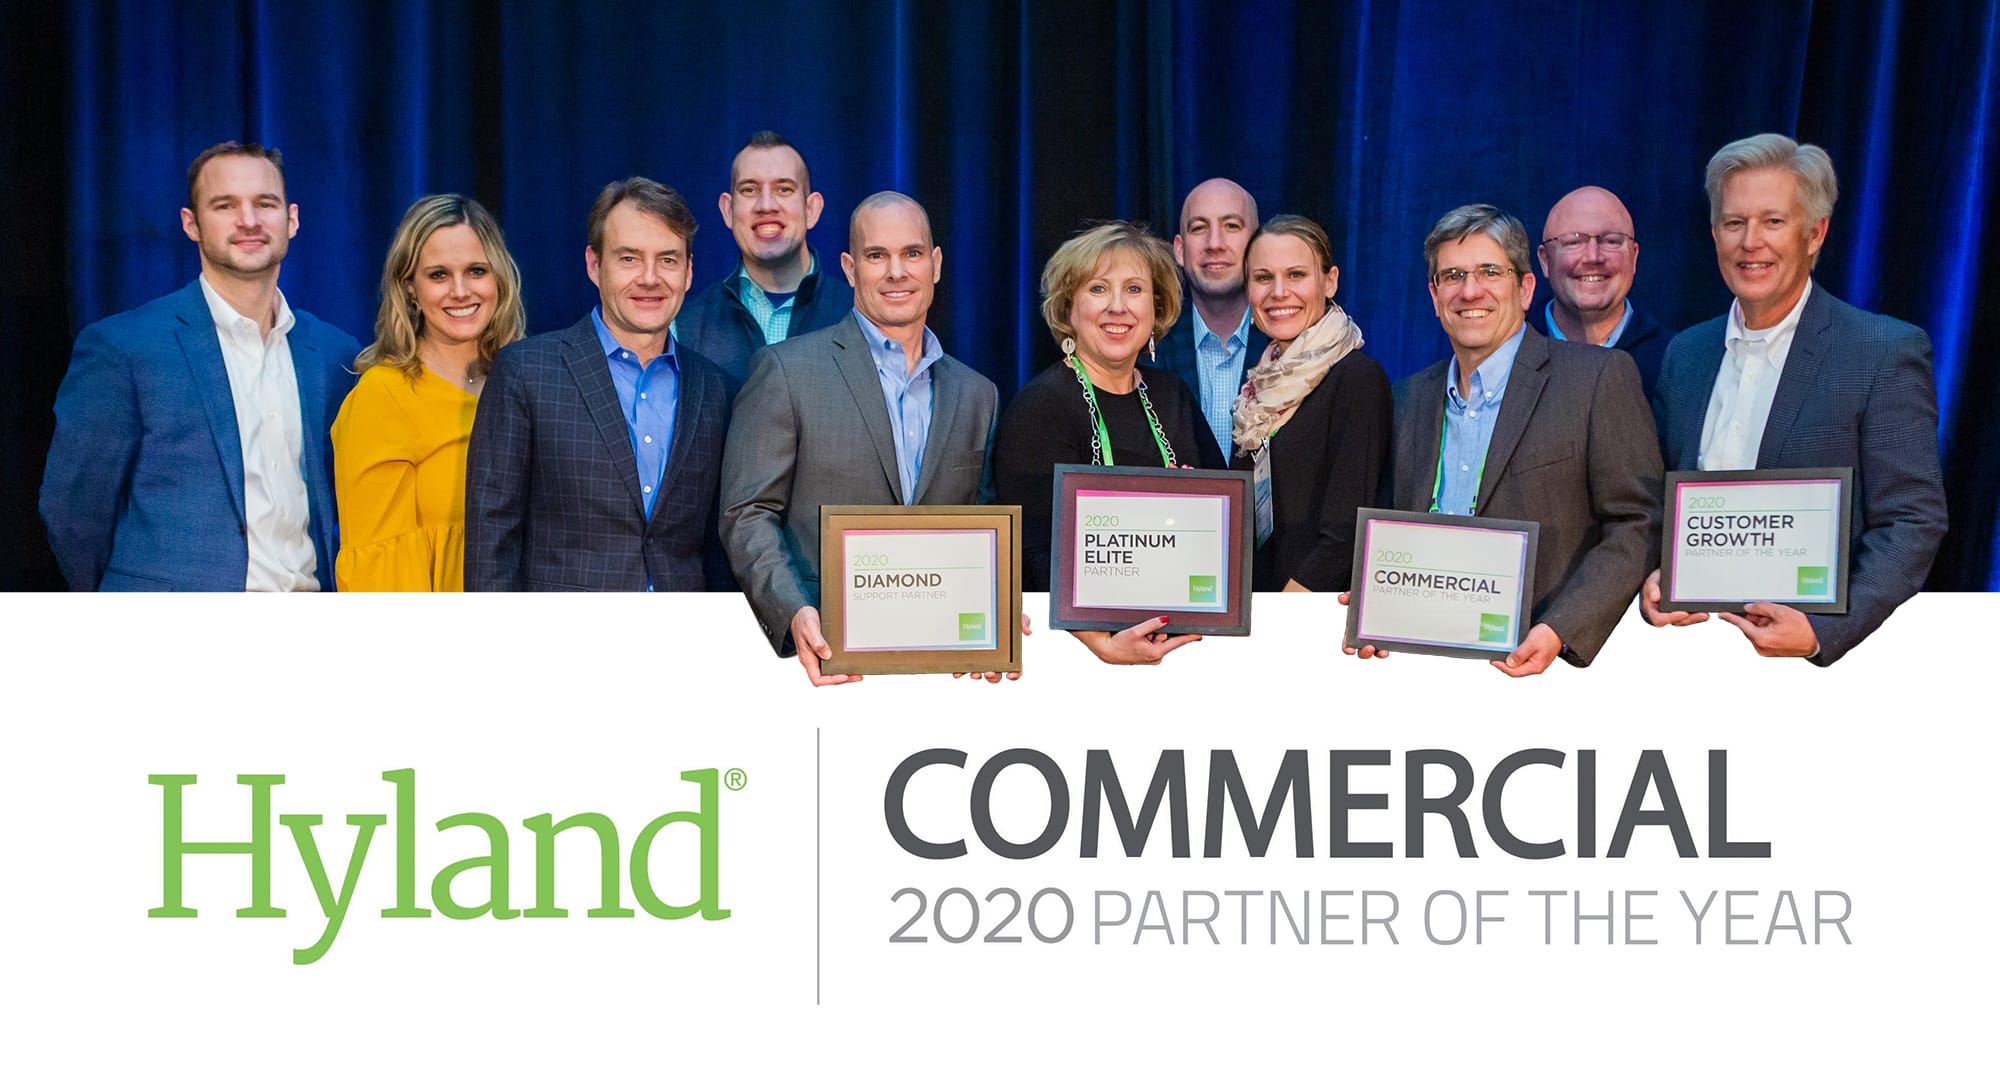 Hyland Commercial Partner of the Year 2020